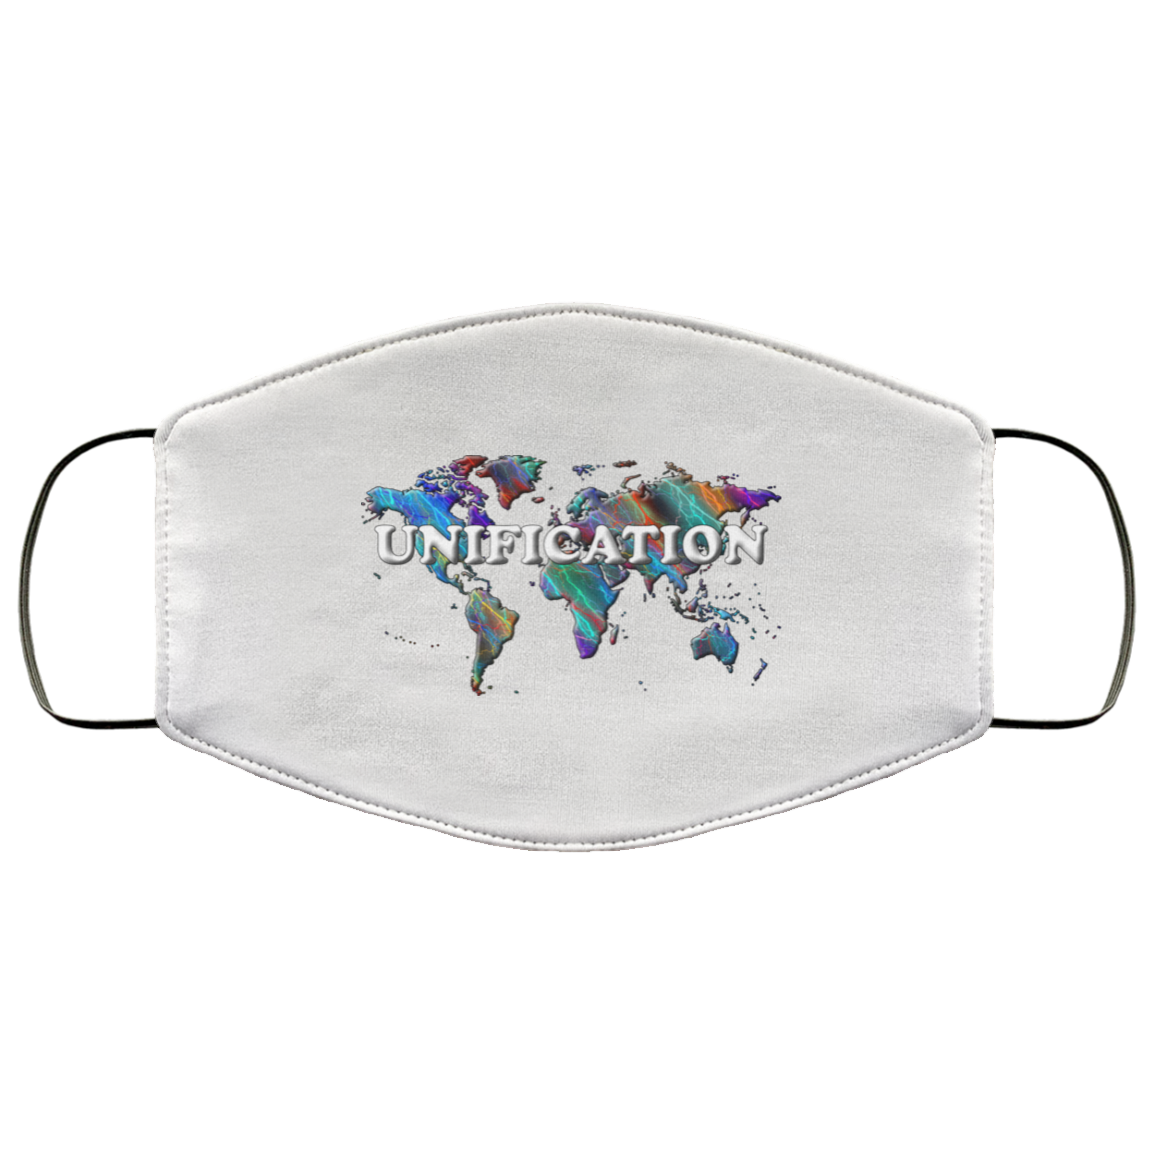 Unification 2 Layer Protective Mask